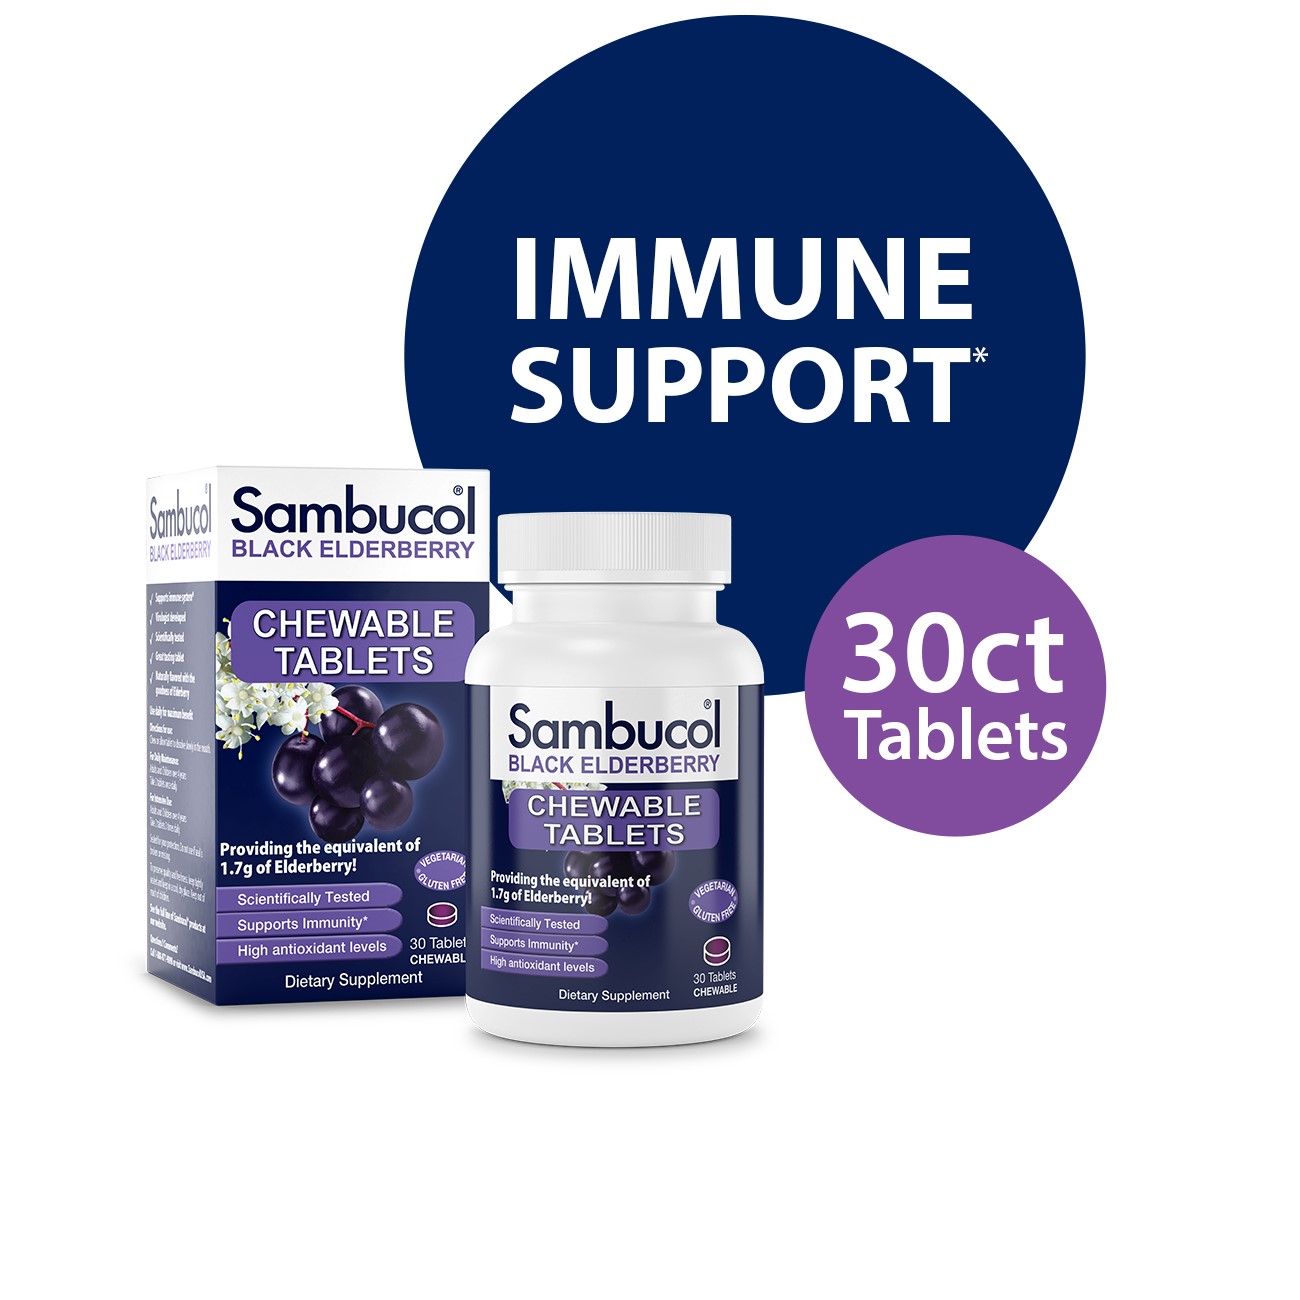 Sambucol Black Elderberry Immune Support Chewable Tablets with Vitamin C, 30 Count - image 3 of 10